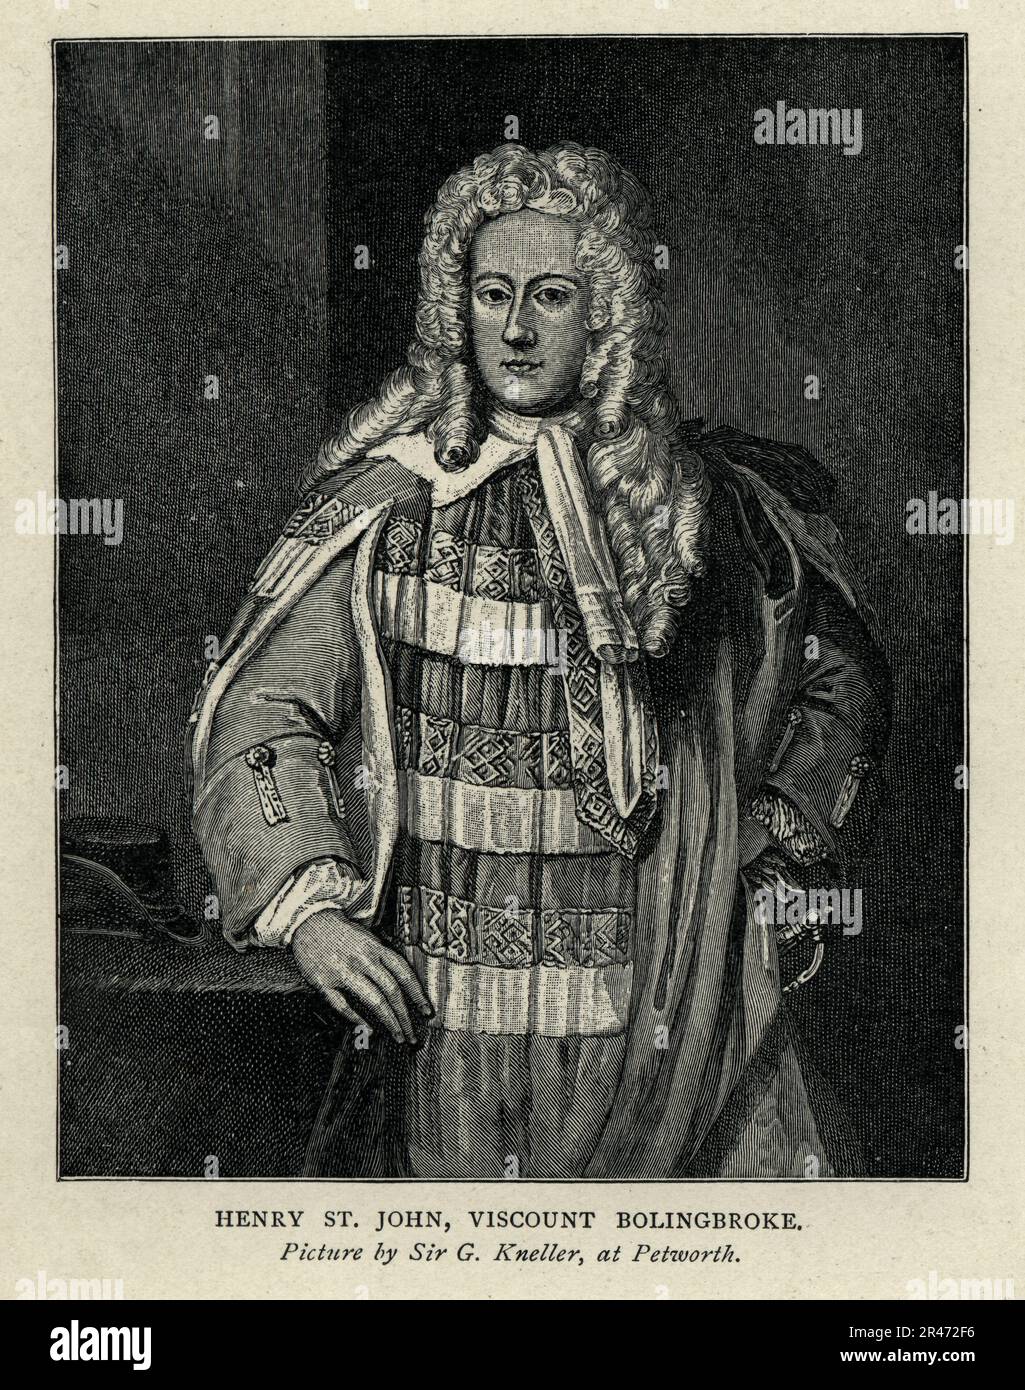 Henry St John, 1st Viscount Bolingbroke  an English politician, government official and political philosopher 18th Cnetury British History, Vintage Illustration Stock Photo